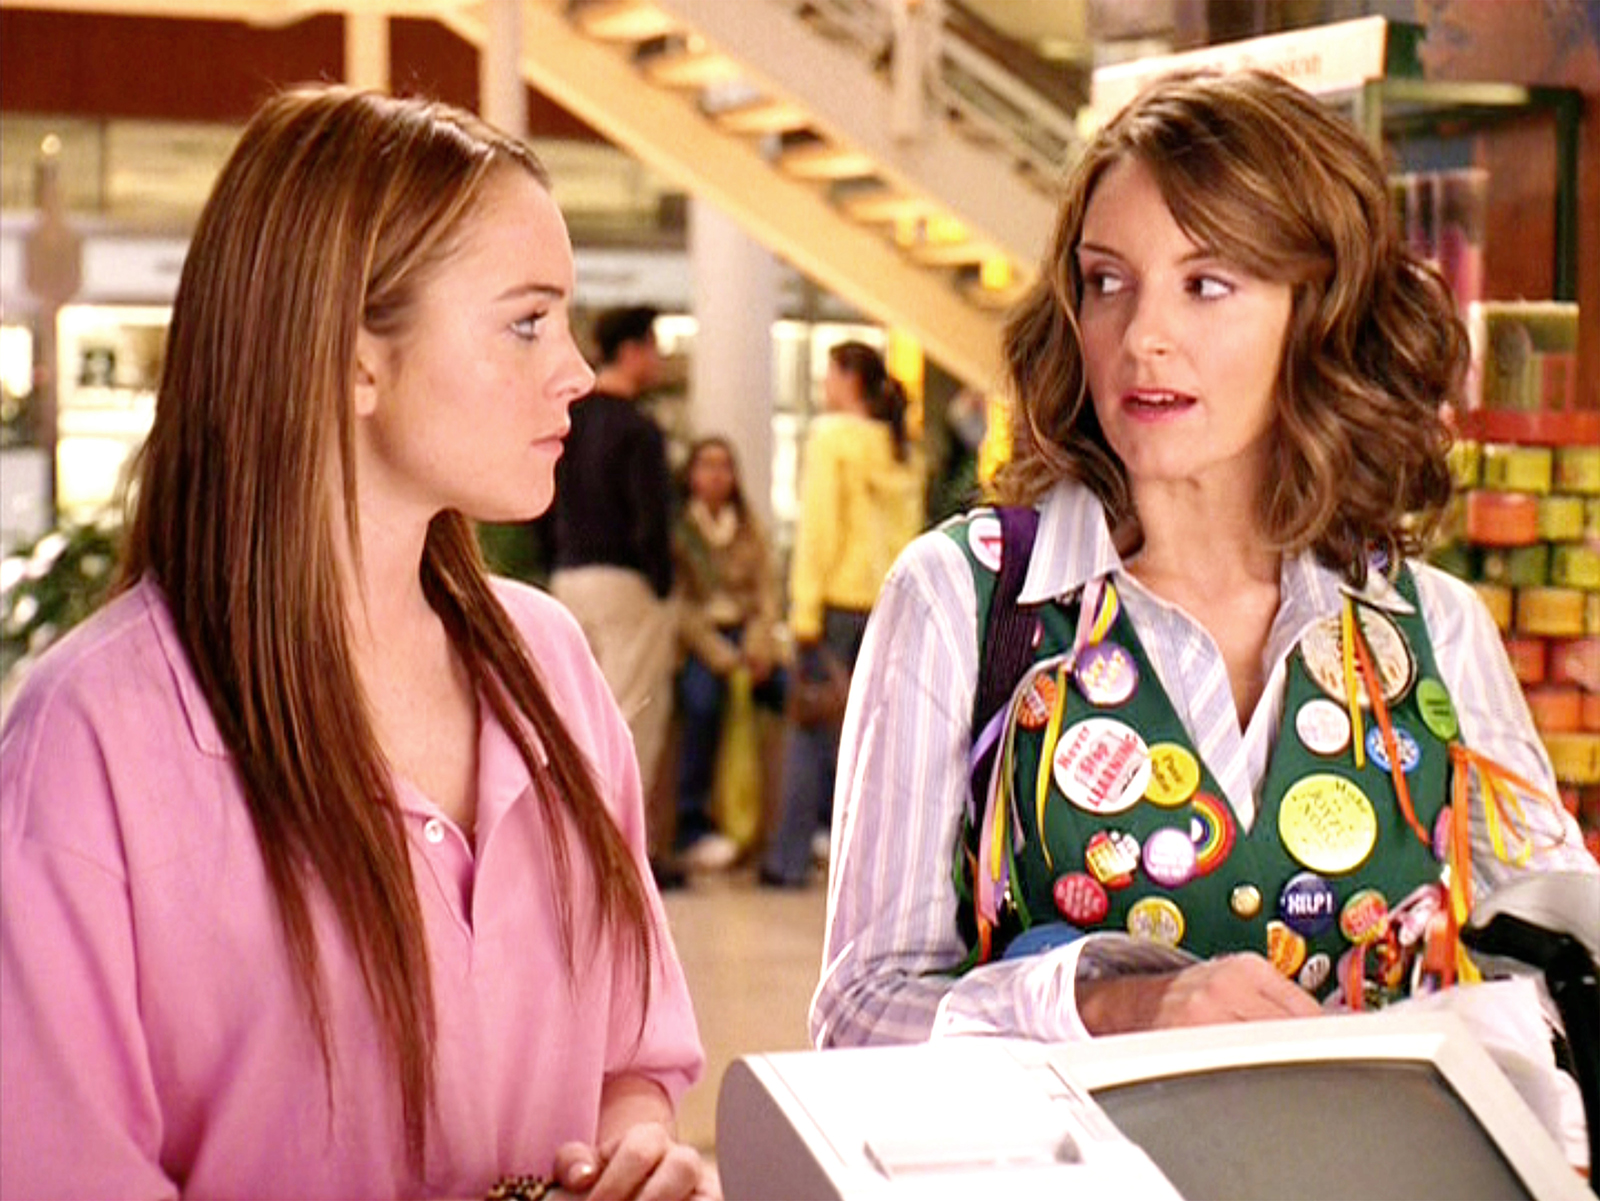 Lindsay Lohan as Cady Heron and Tina Fey as Ms. Sharon Norbury in the 2004 movie "Mean Girls".